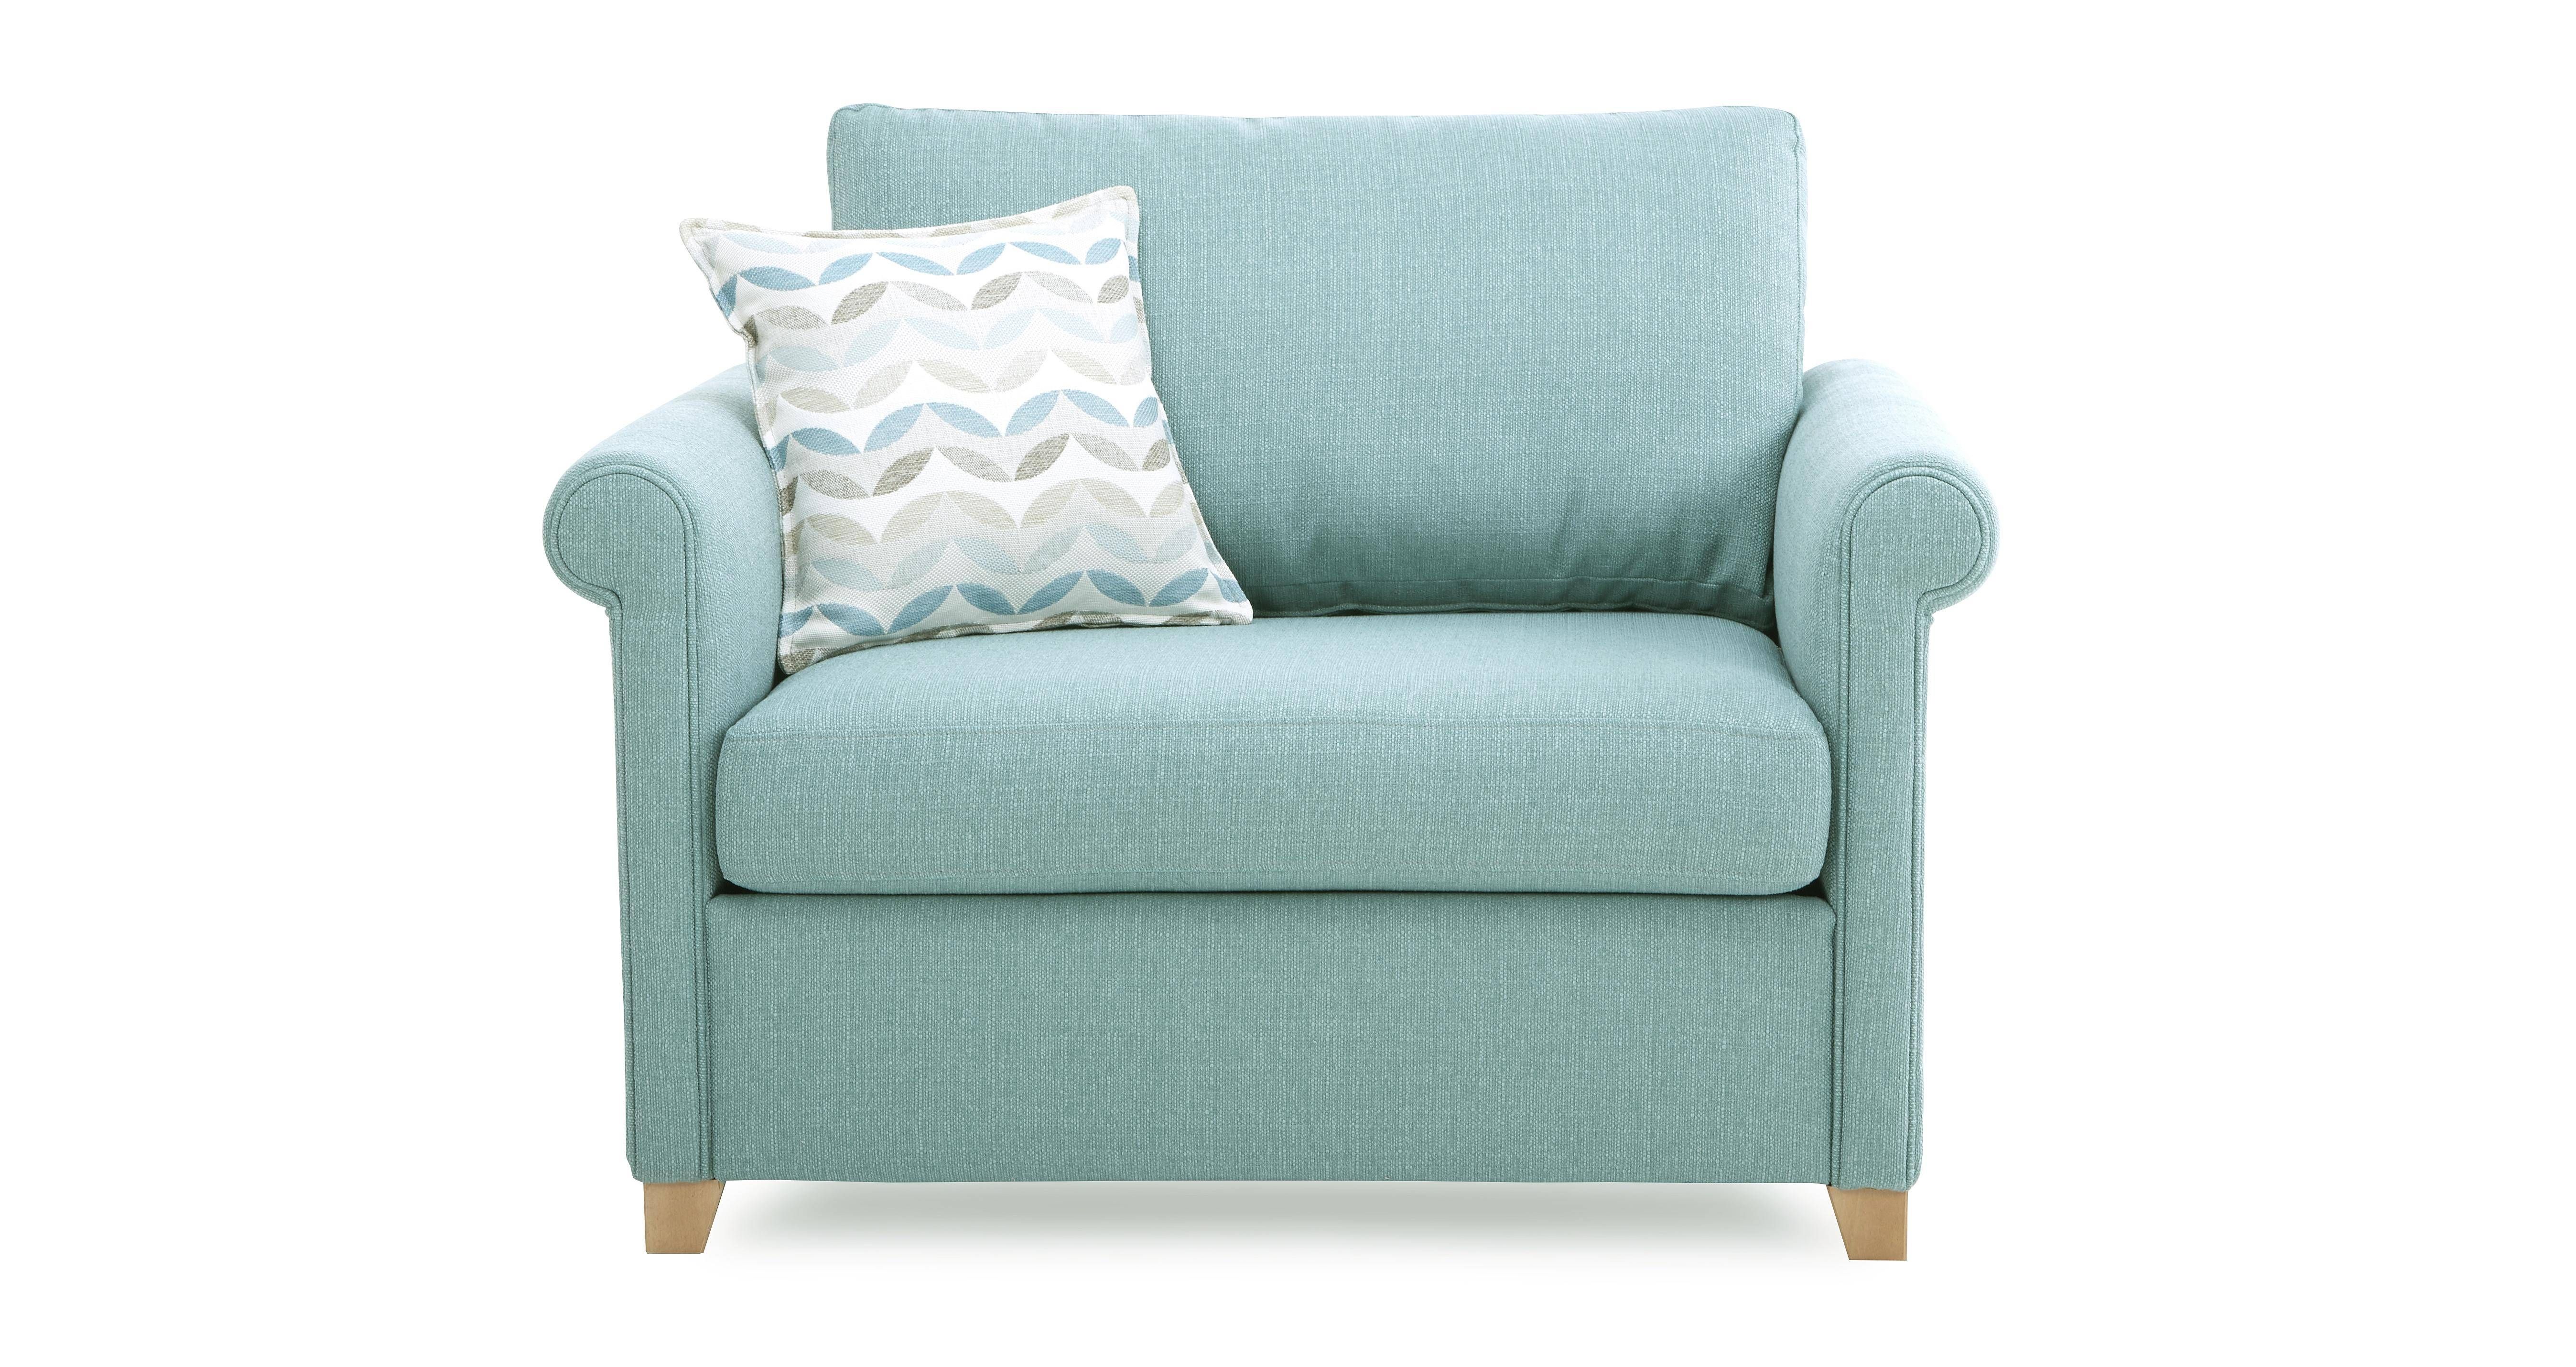 30 Best Collection Of Cheap Kids Sofas